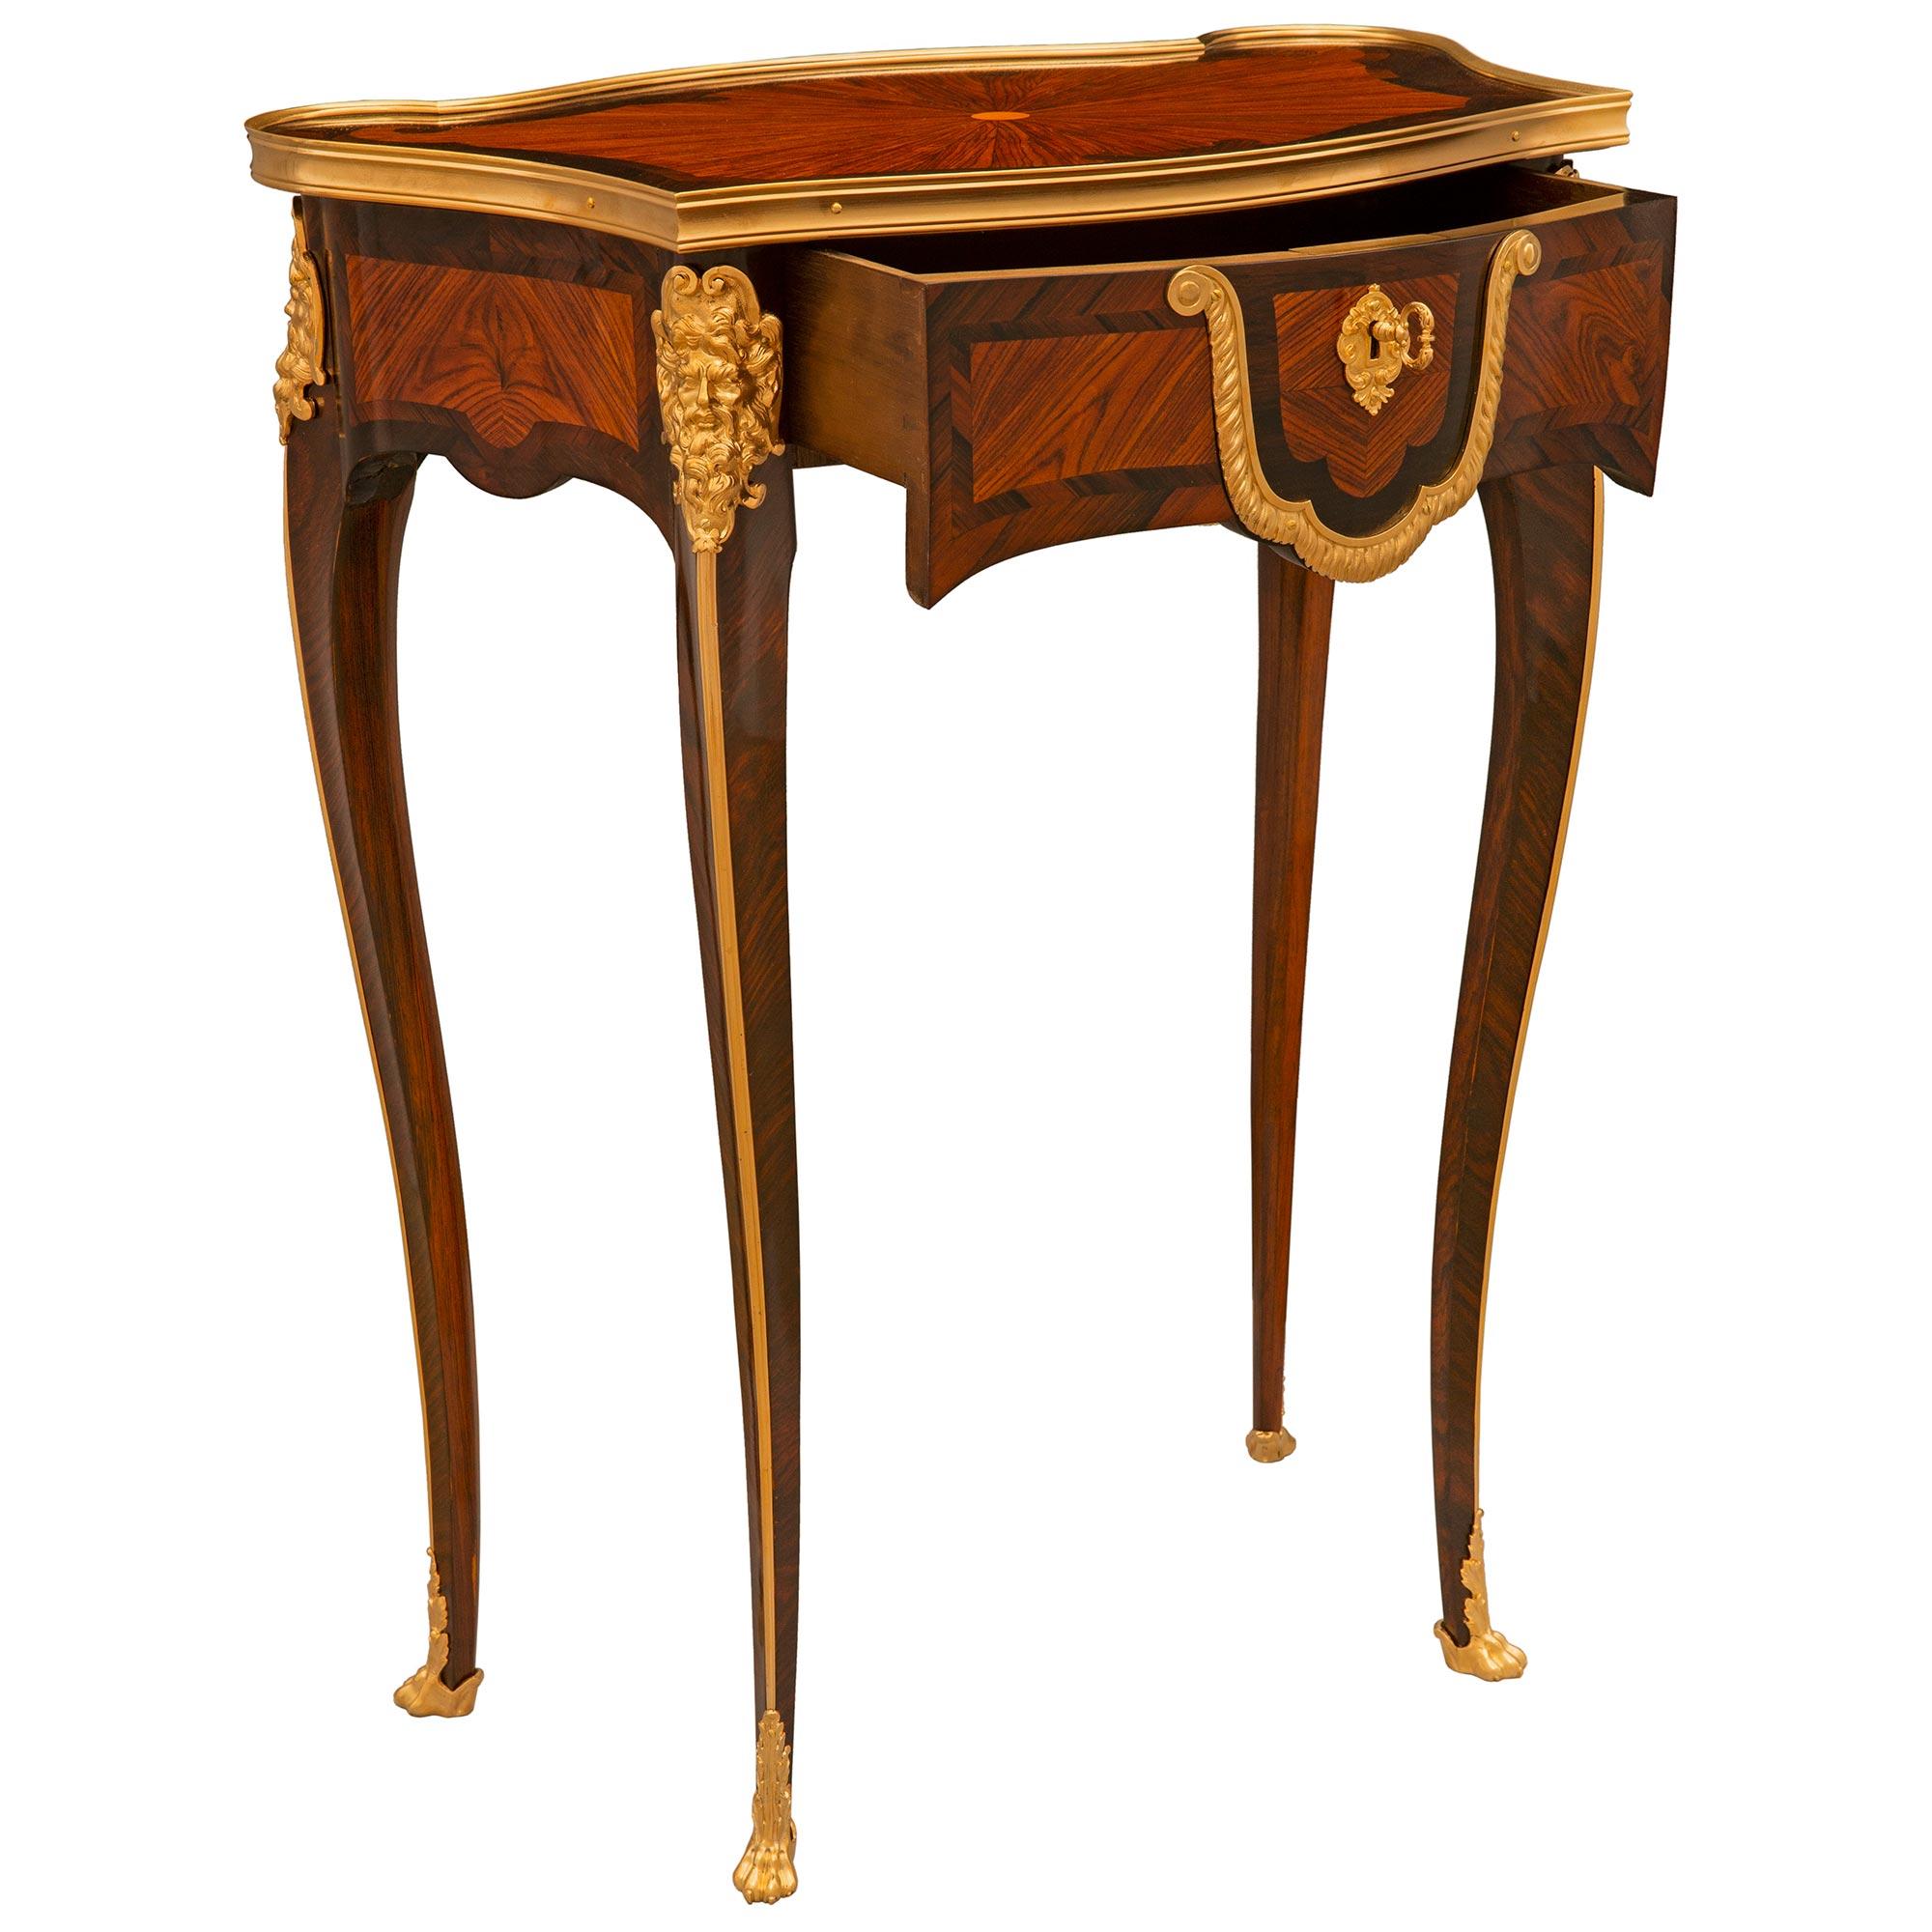 French 19th Century Belle Epoque Period Tulipwood, Kingwood & Ormolu Side Table In Good Condition For Sale In West Palm Beach, FL